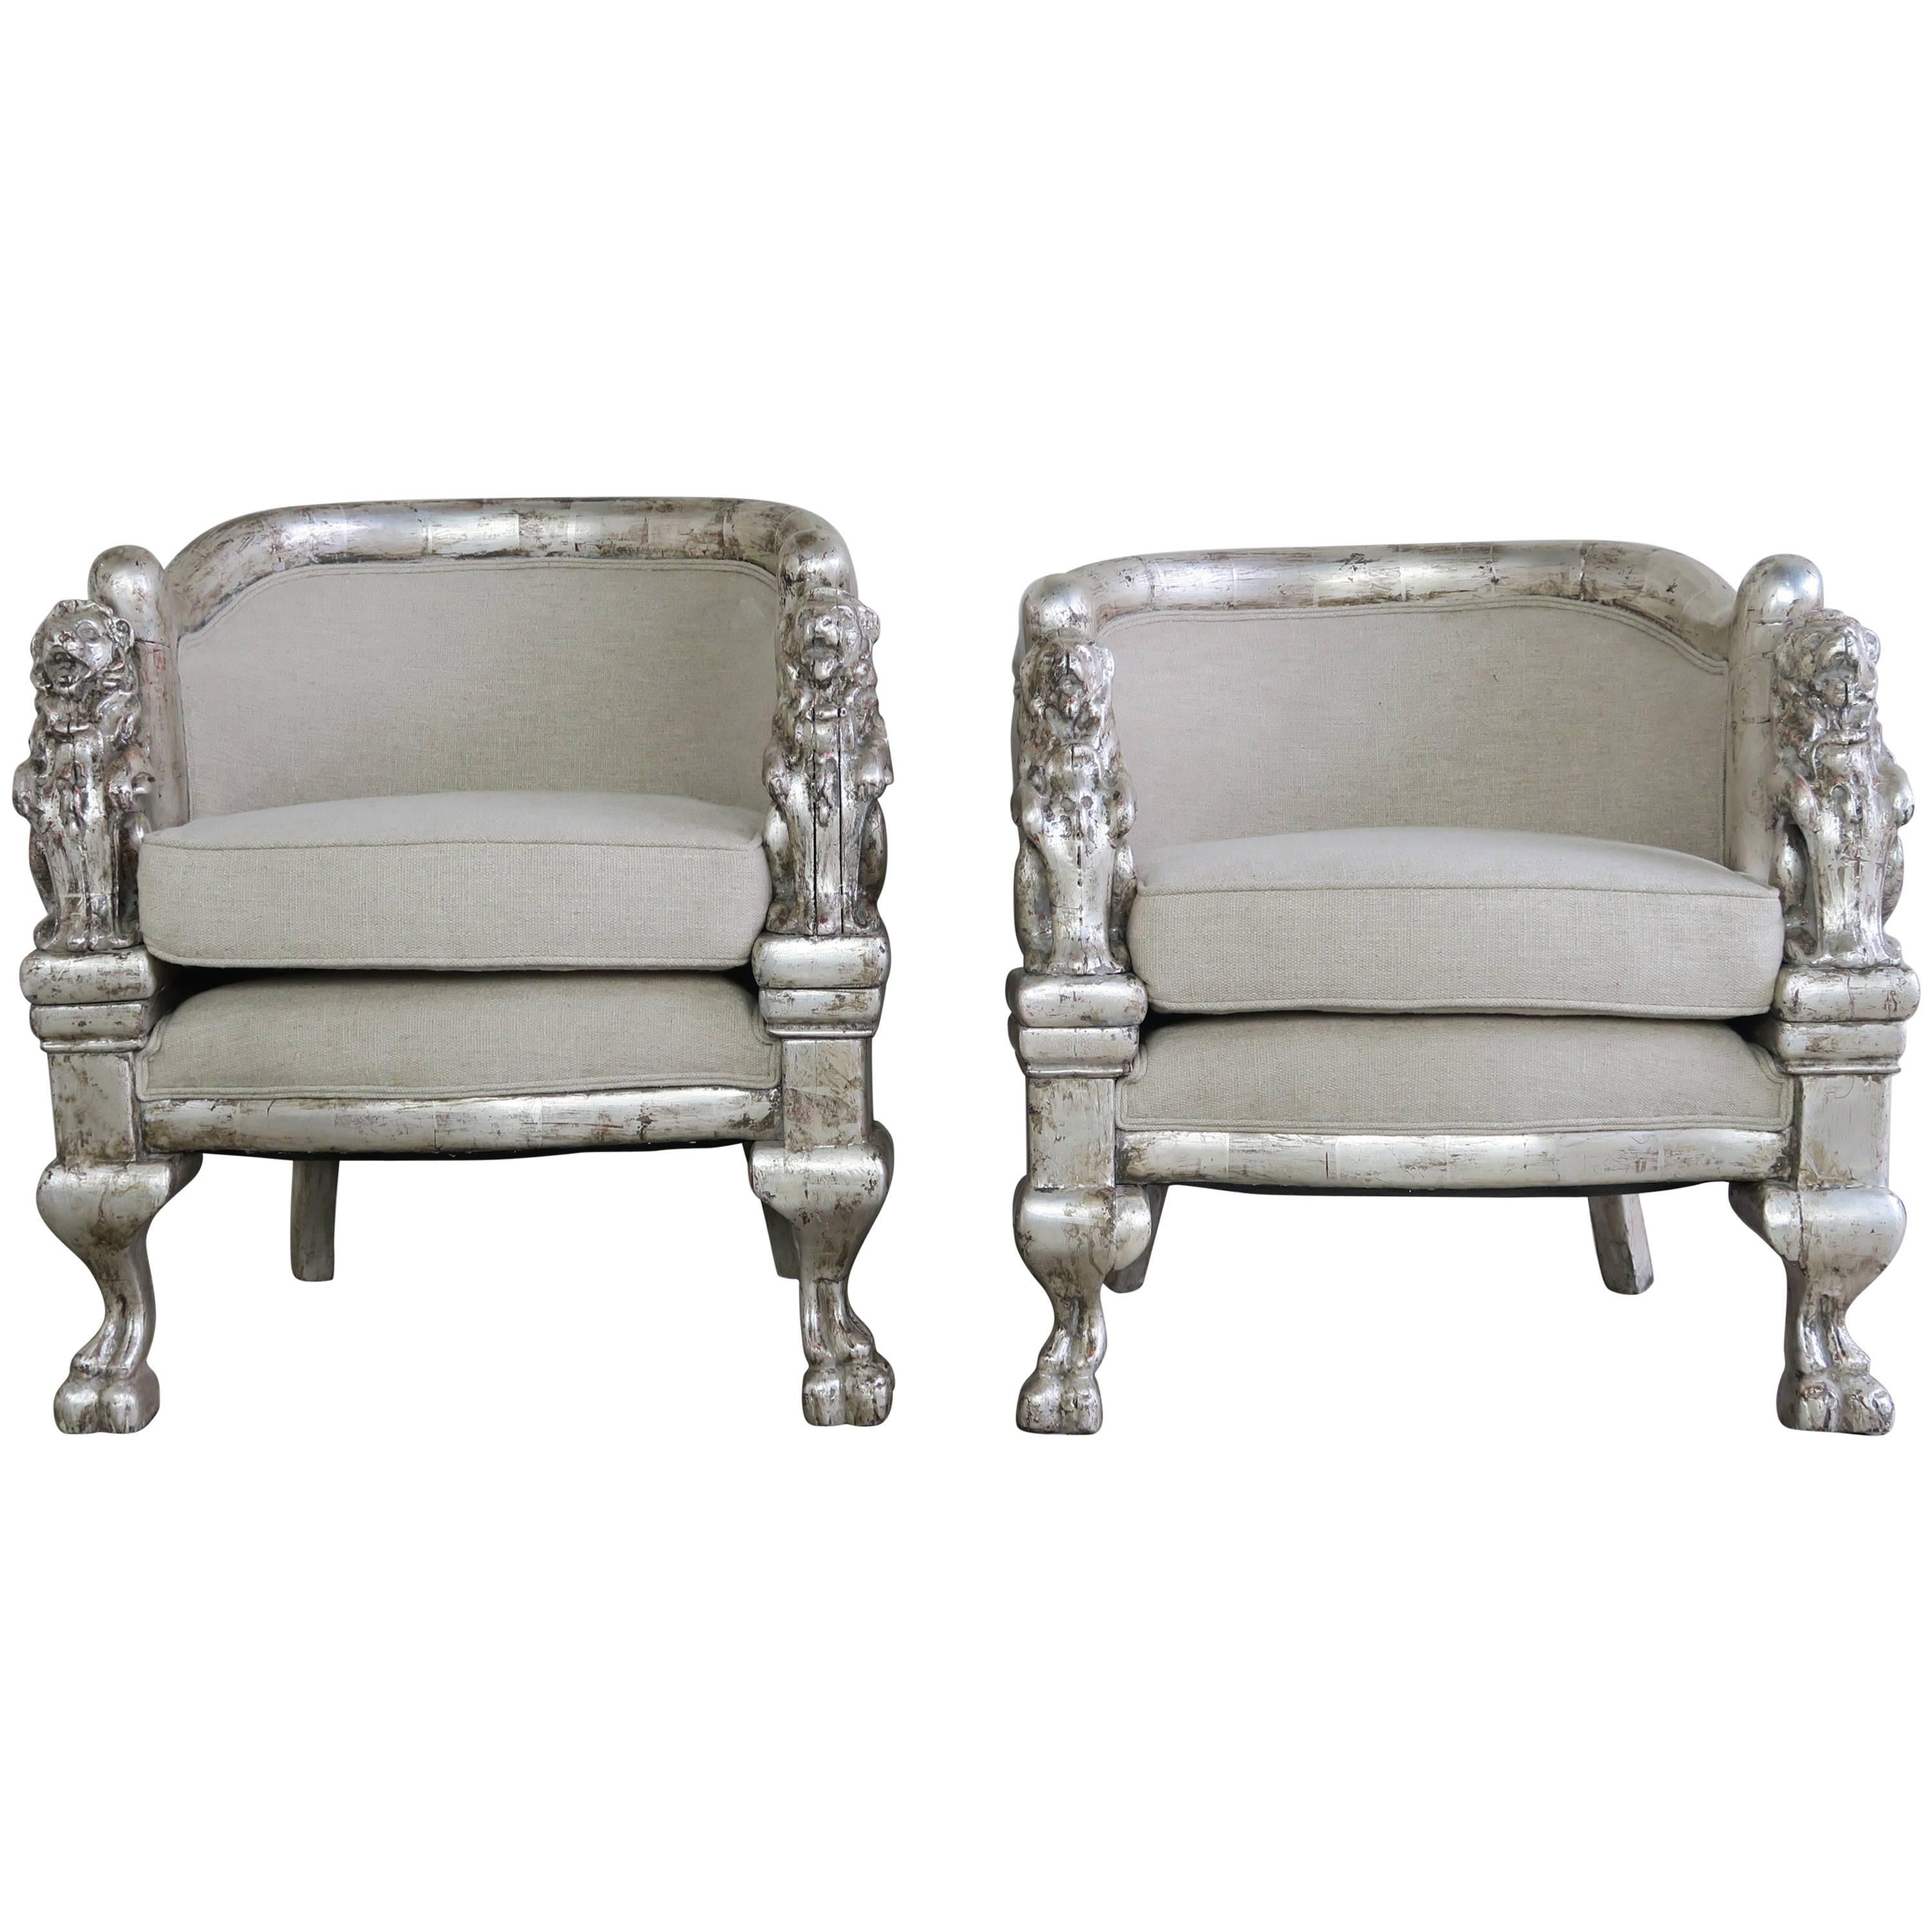 Pair of Carved Lion Silvered Armchairs